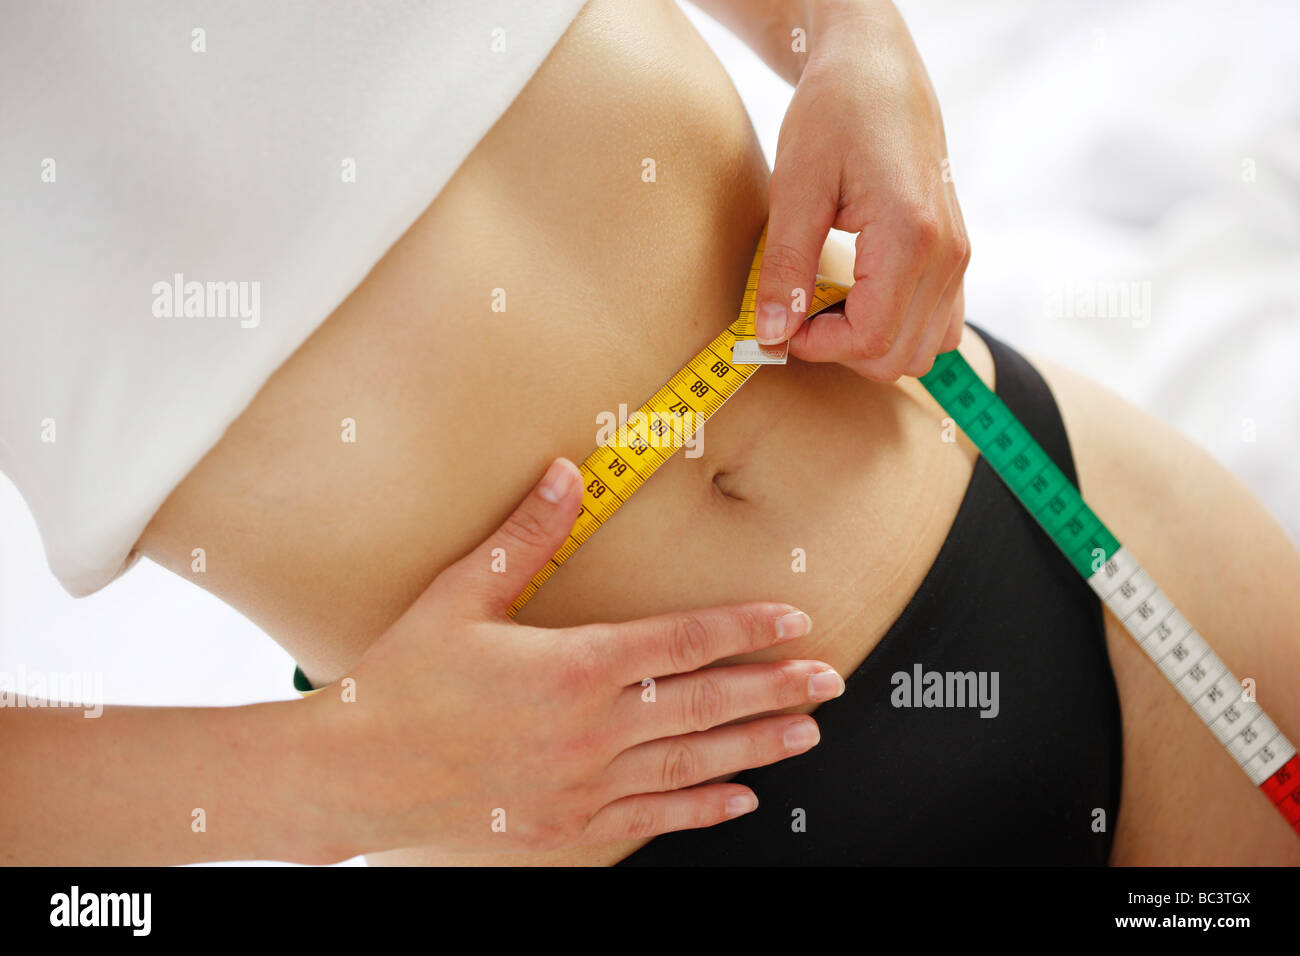 Woman is measuring her waist with a measuring tape Stock Photo